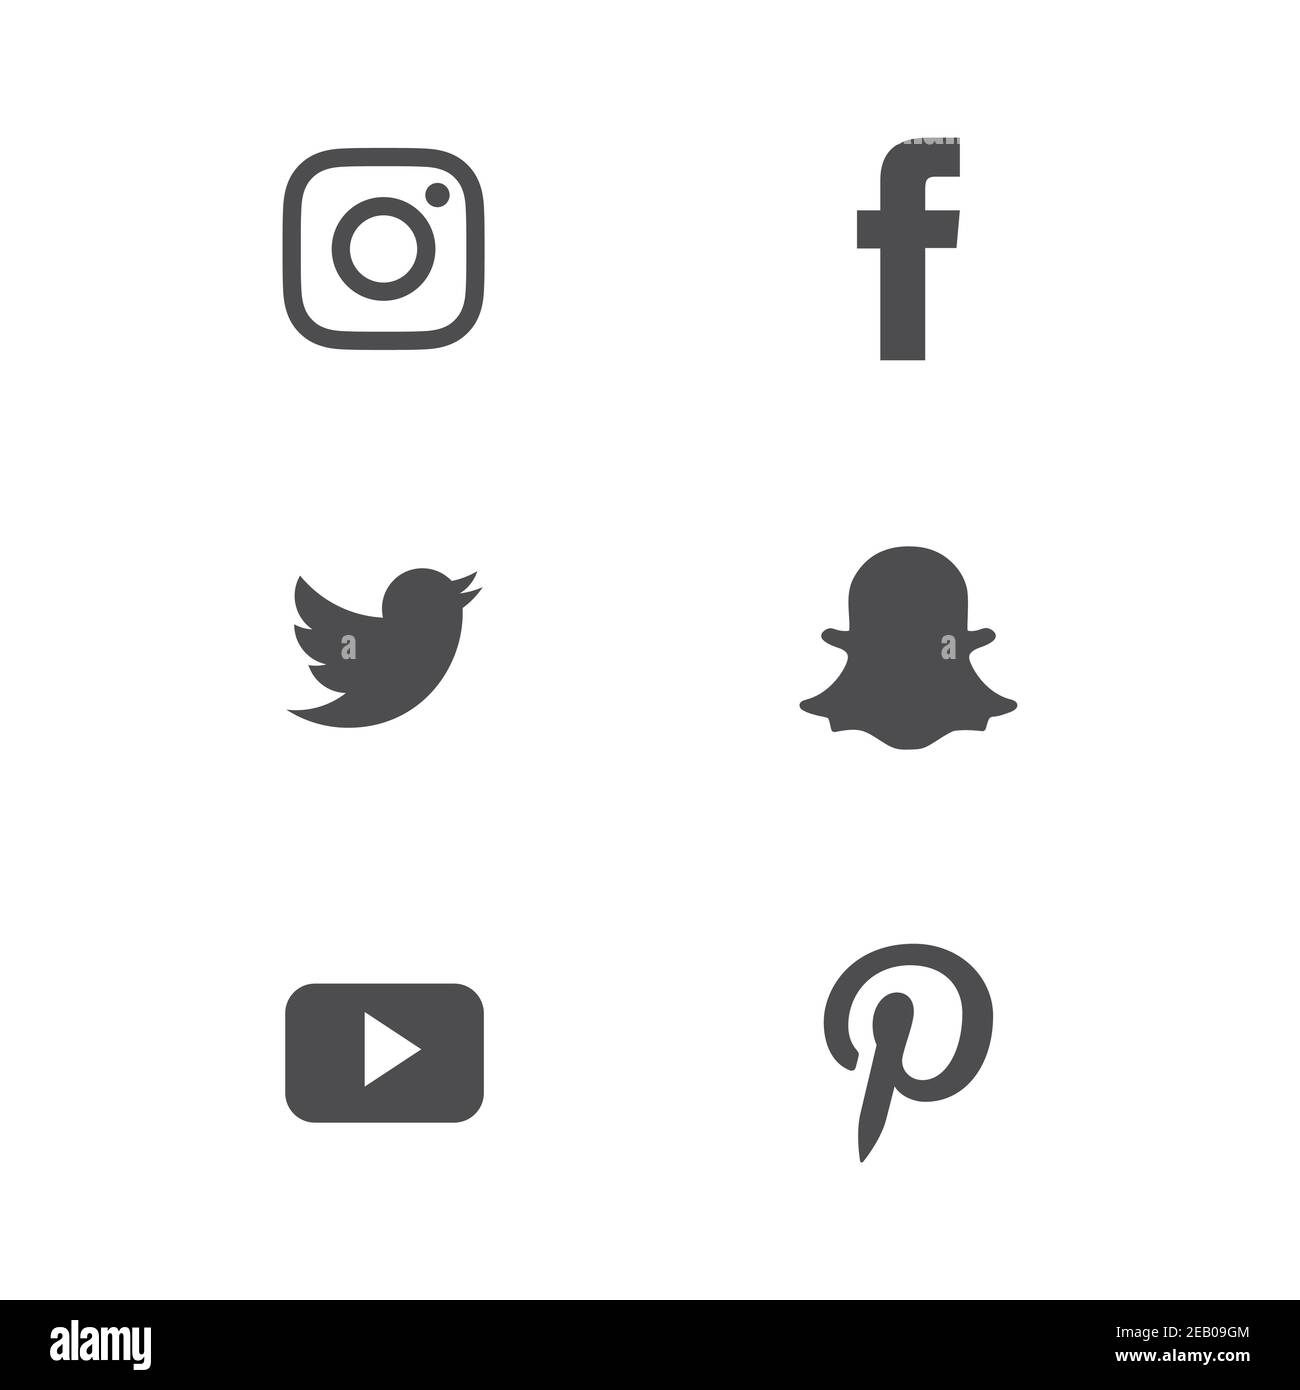 Set of popular social media icons. Instagram, Facebook, Twitter, Snapchat, WhatsApp and Pinterest icons. Stock Vector